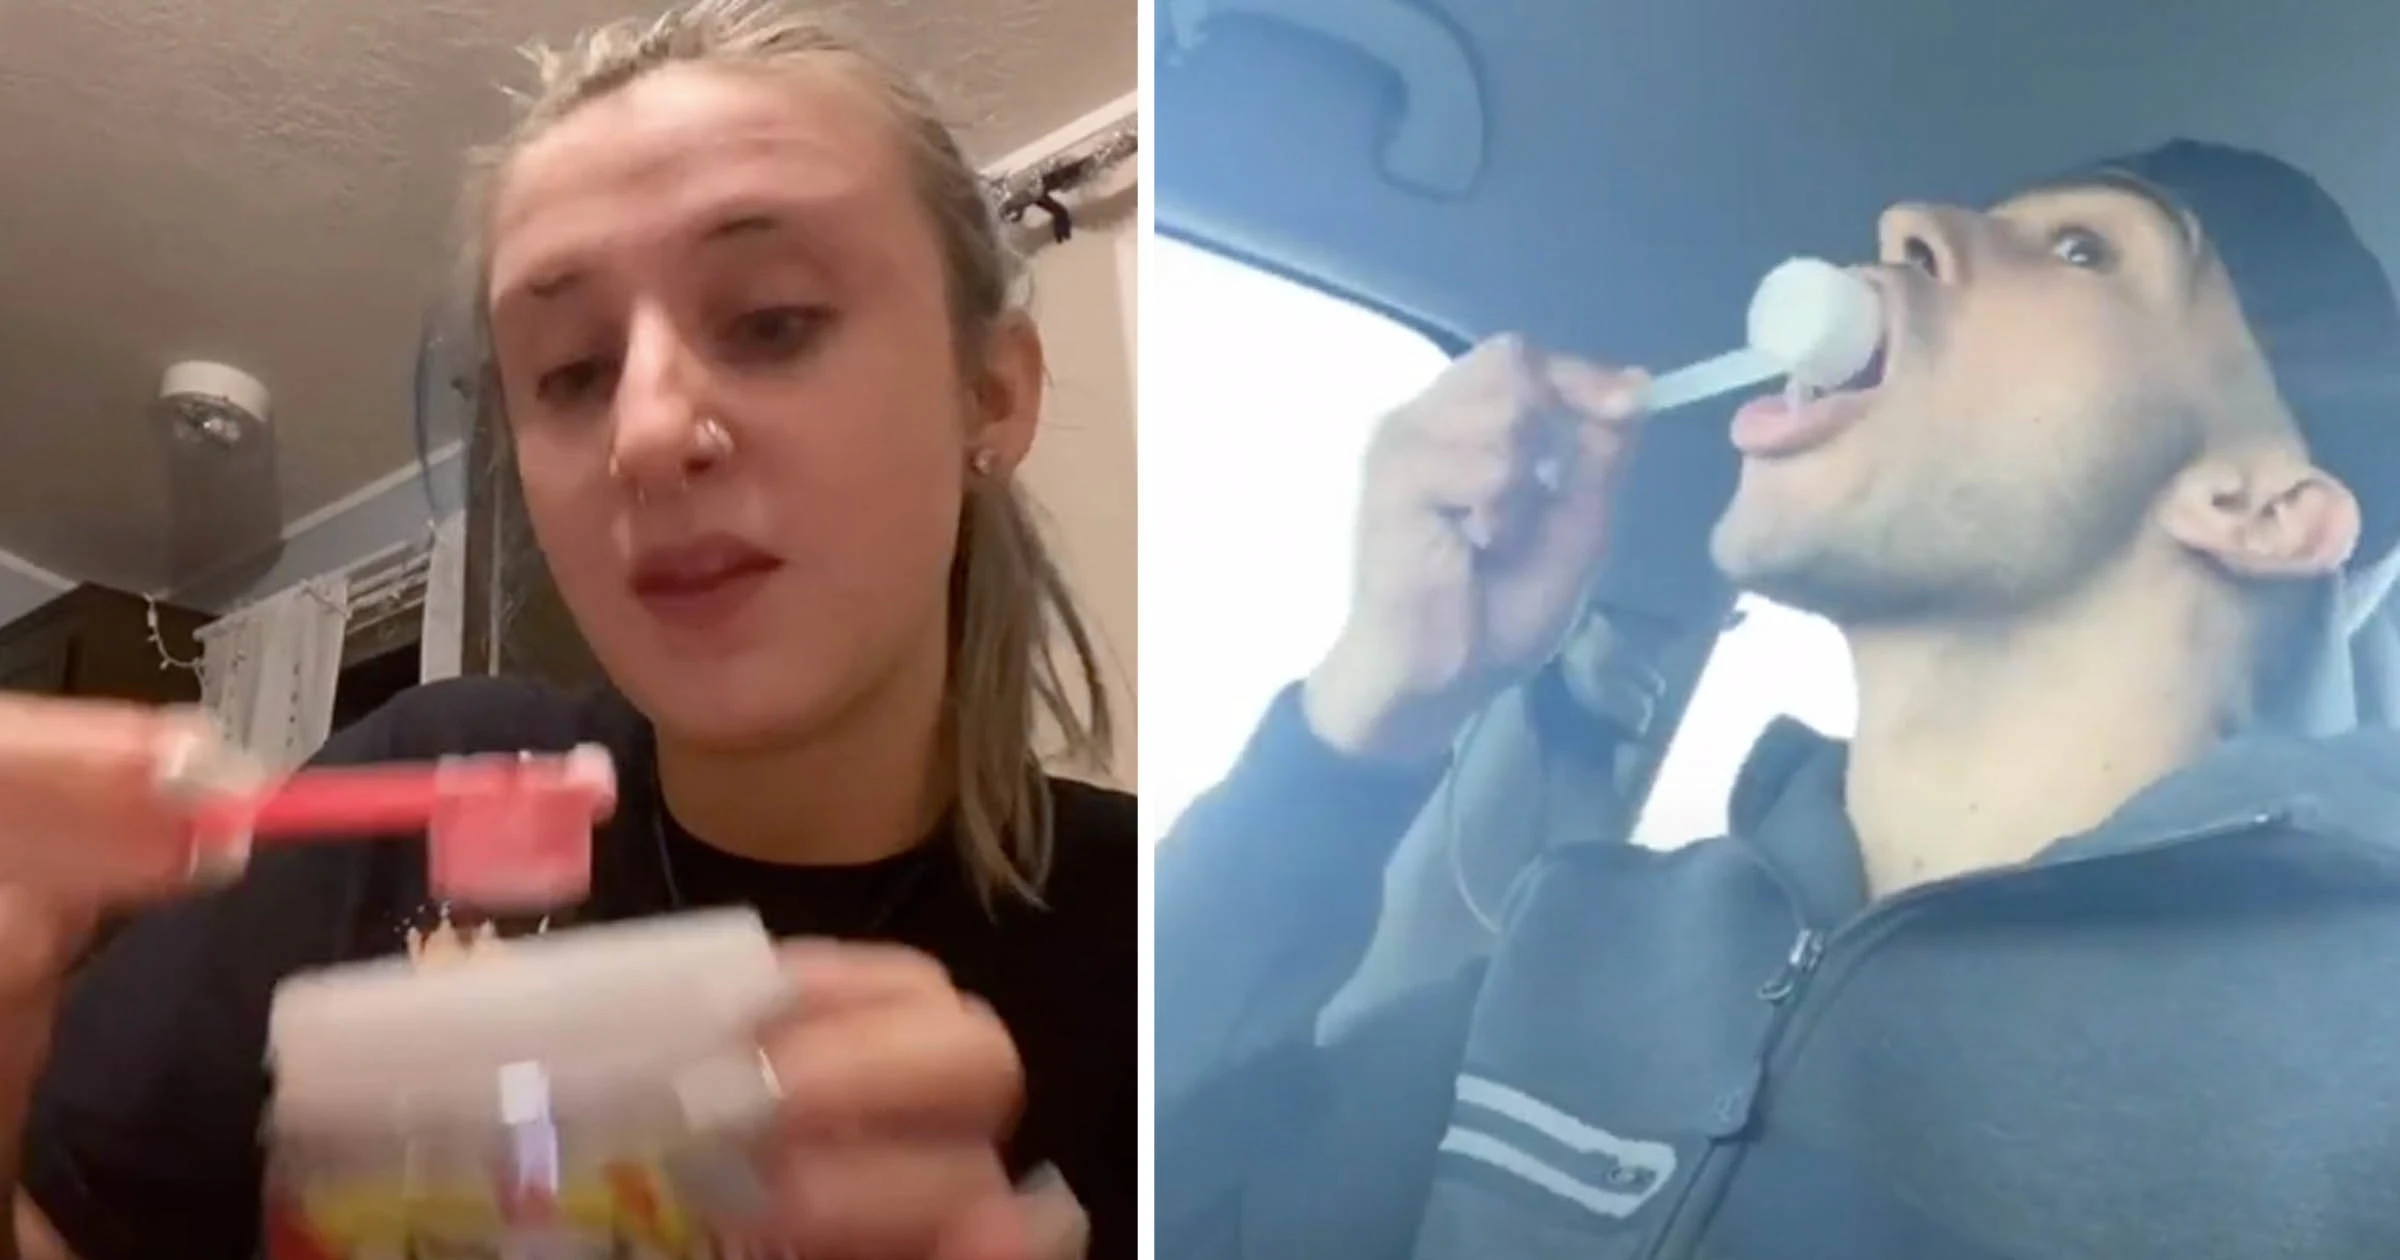 The Trend Became Common On TikTok